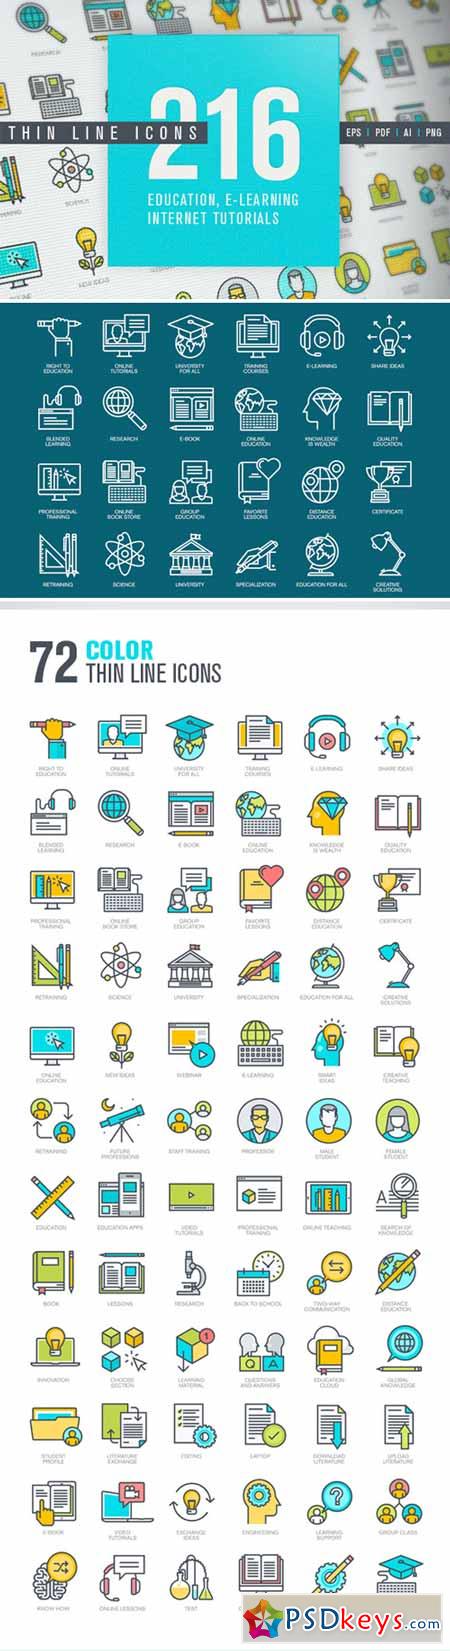 Thin Line Icons for Online Education 329521